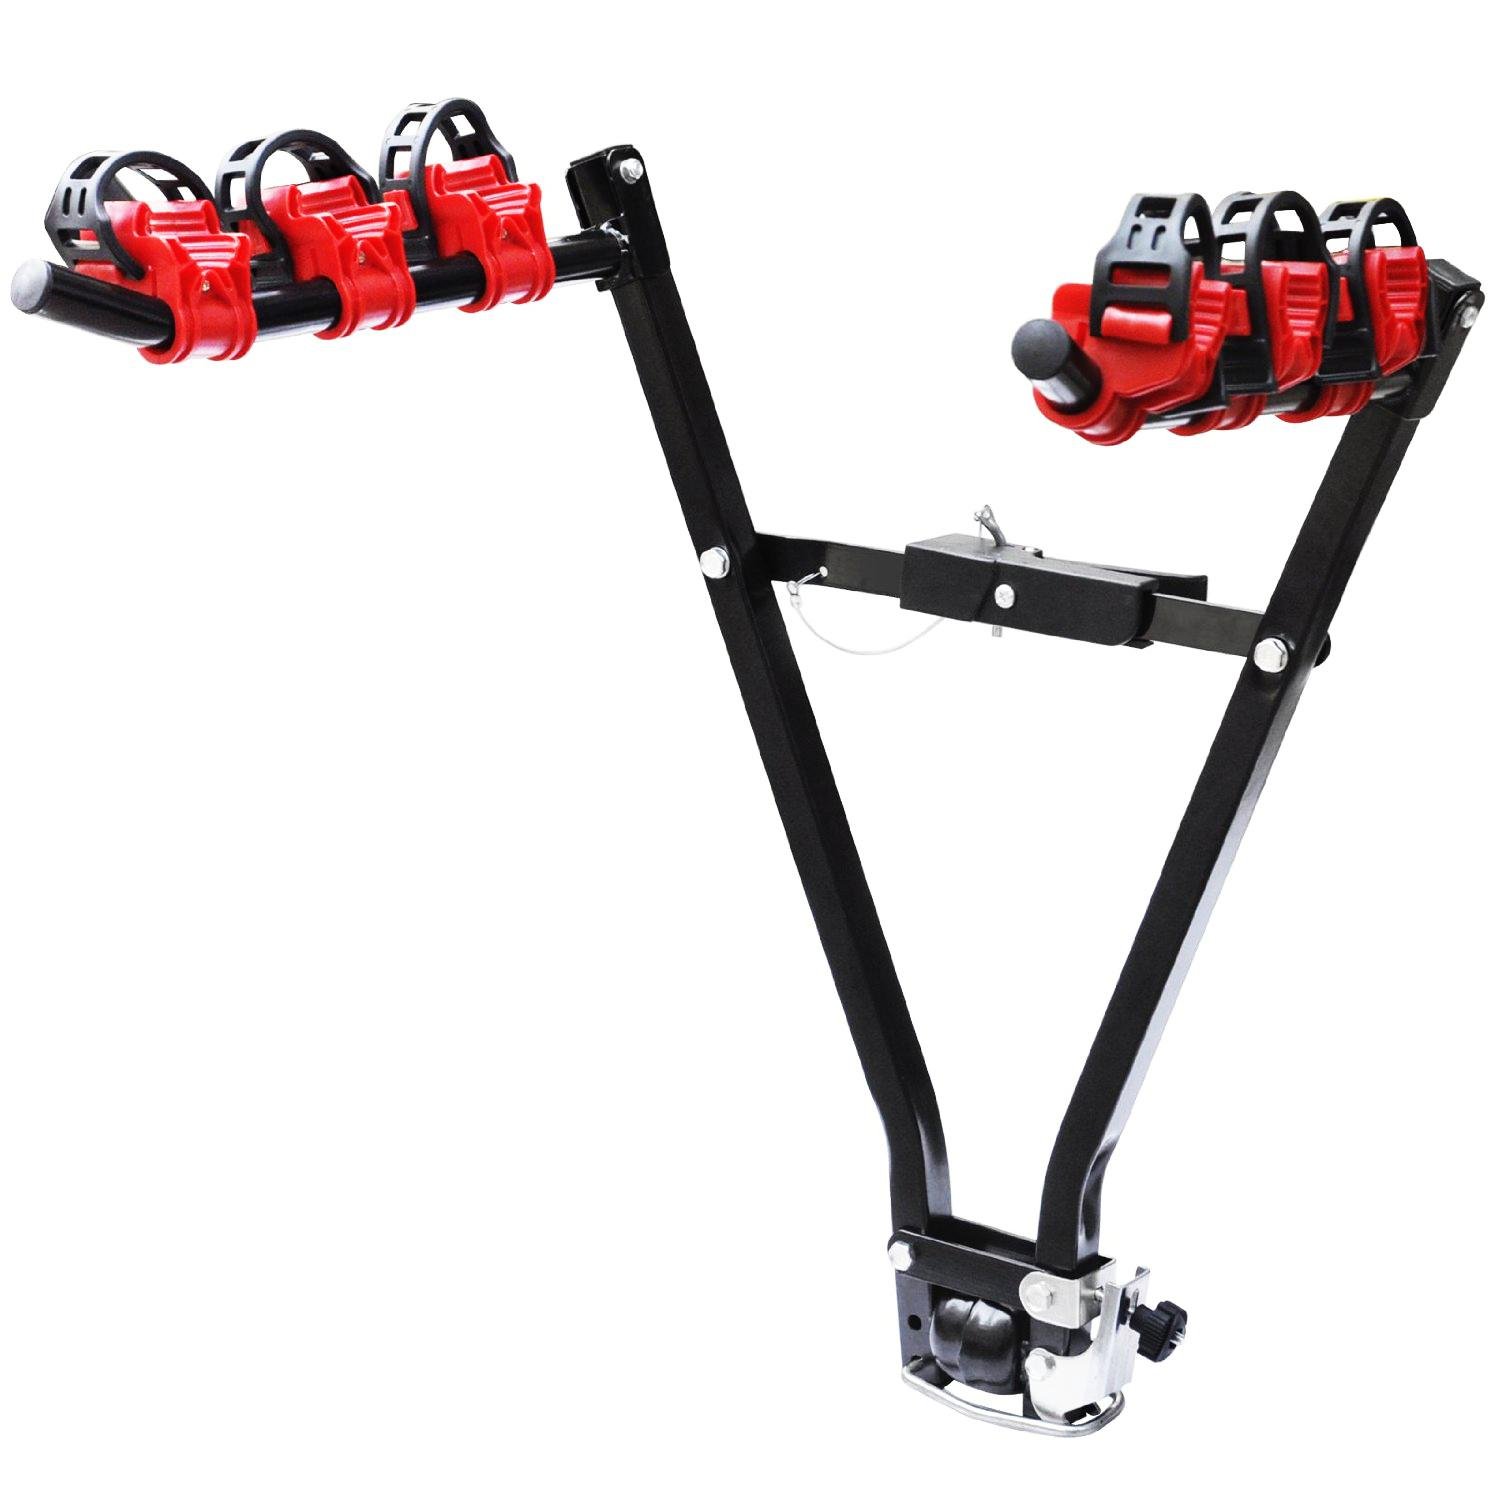 https://oypla.com/images/products/3665-universal-3-bike-bicycle-tow-bar-car-mount-rack-stand-carrier.jpg